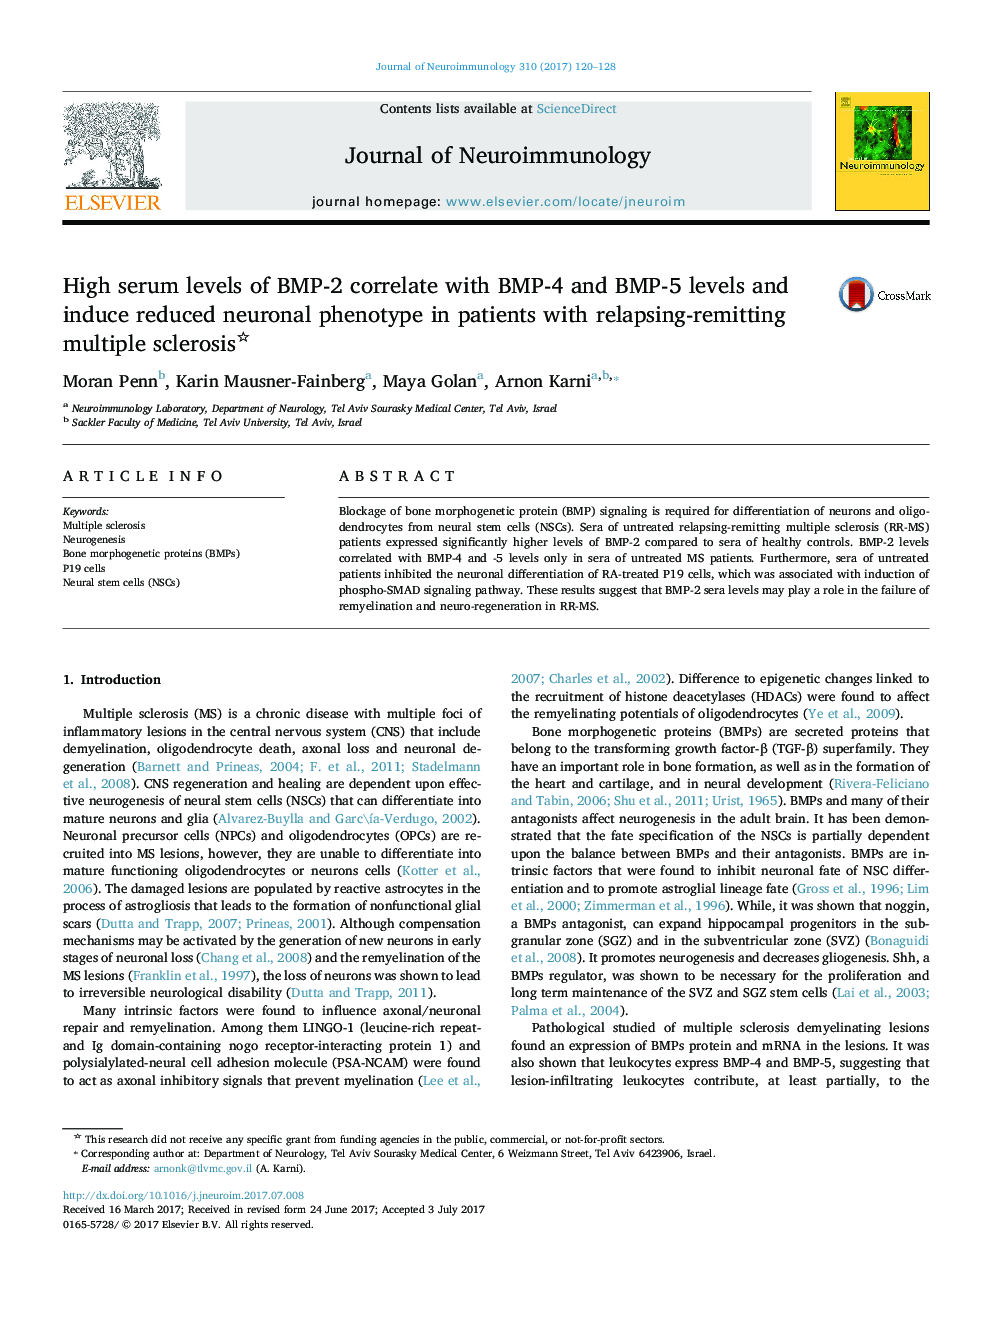 High serum levels of BMP-2 correlate with BMP-4 and BMP-5 levels and induce reduced neuronal phenotype in patients with relapsing-remitting multiple sclerosis